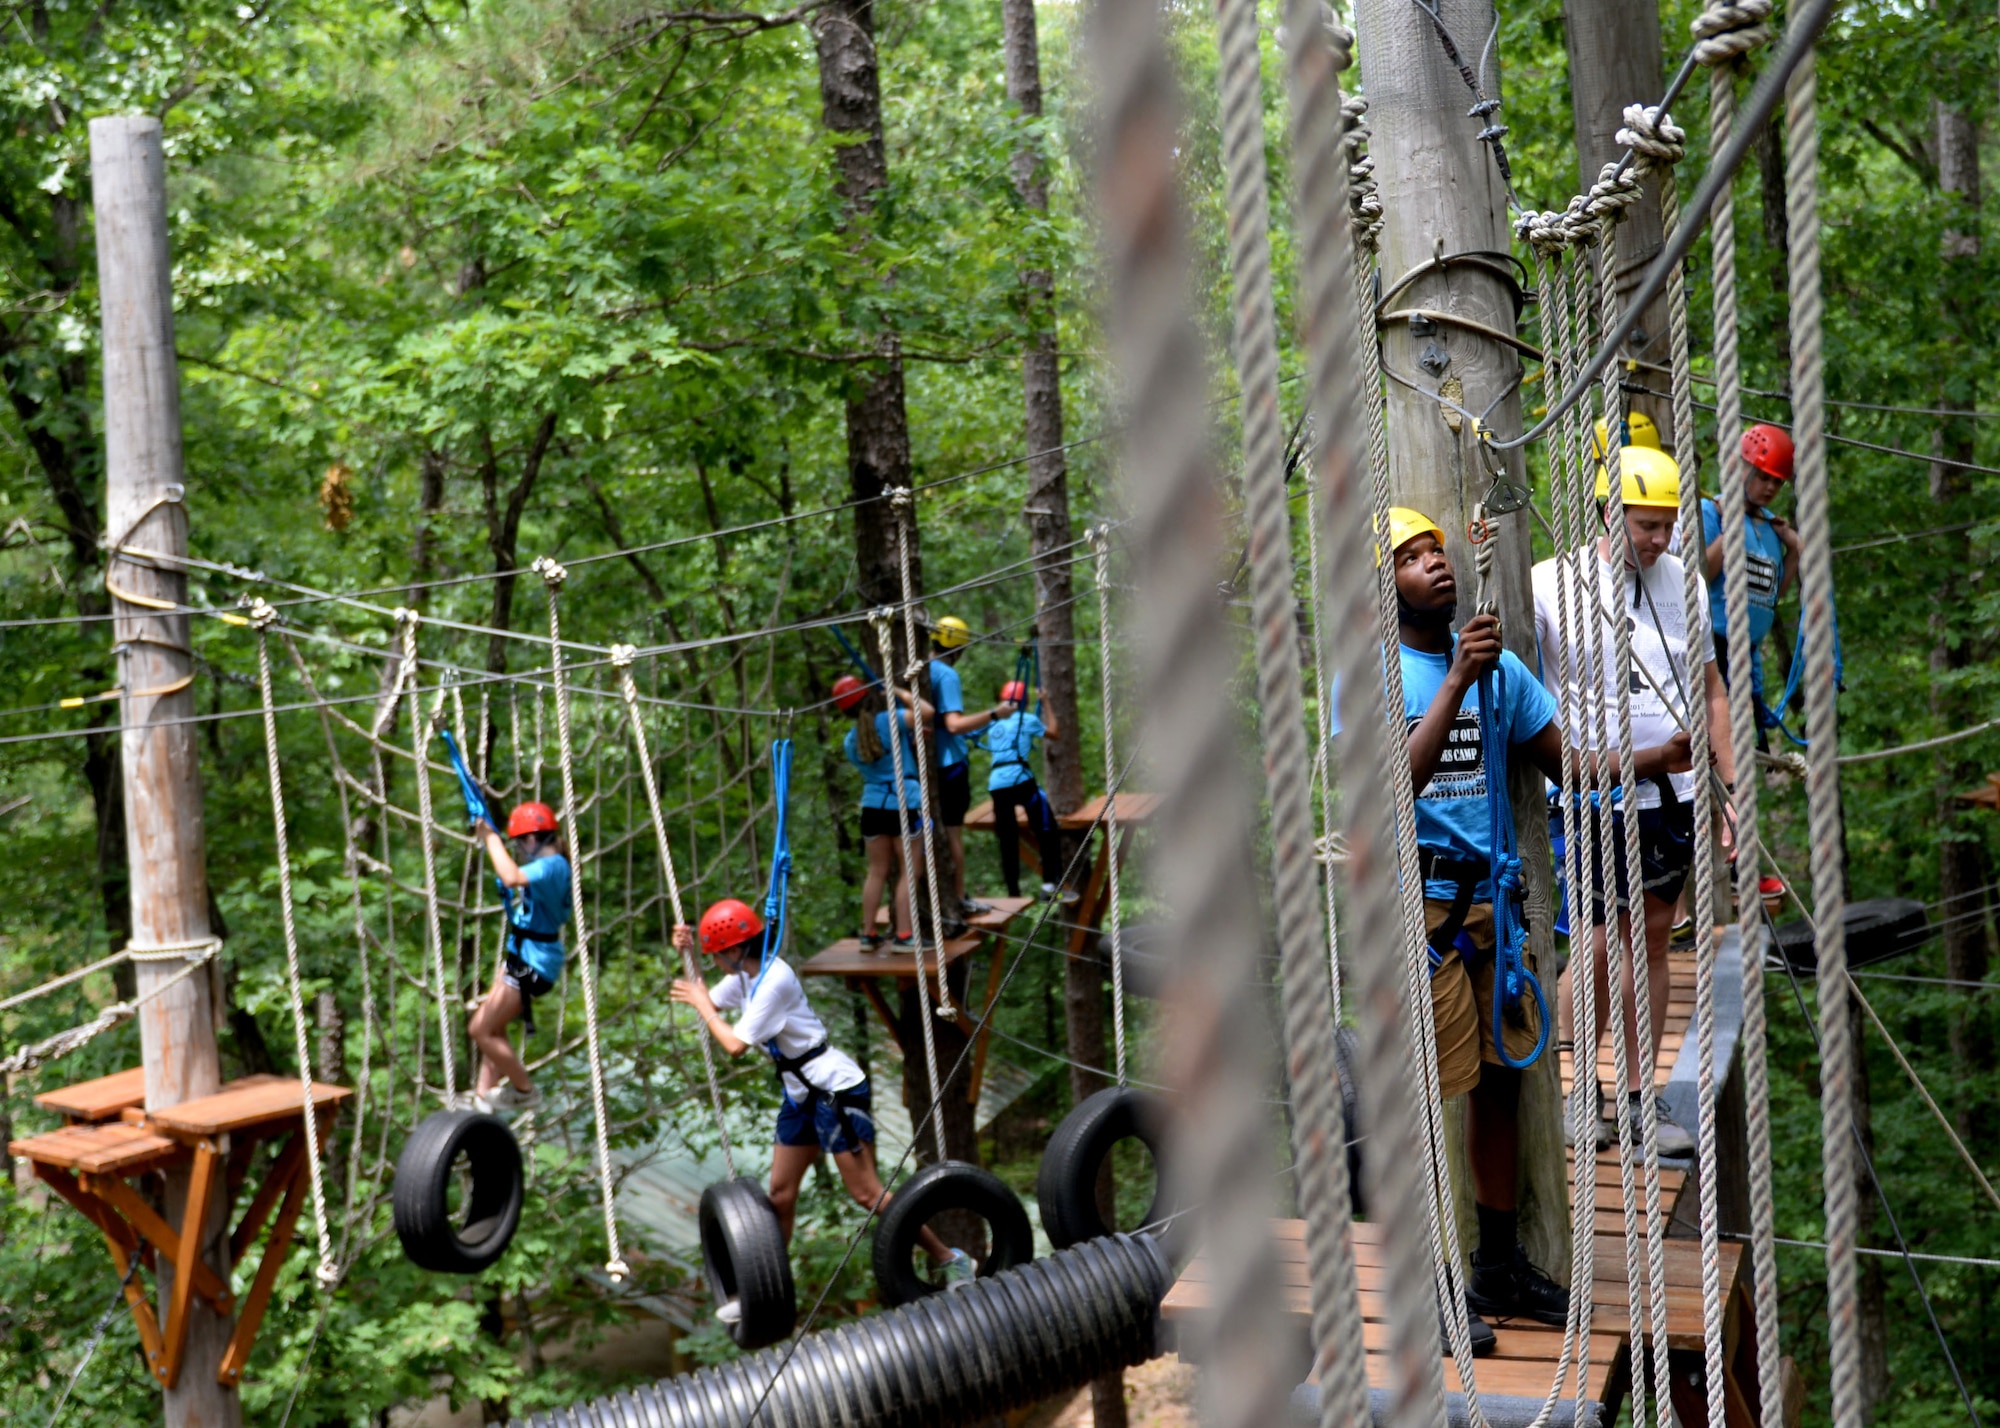 Gold Star children and U.S. Air Force volunteers make their way through an obstacle course June 15, 2017, at the Hearts of Our Heroes Camp in Little Rock, Ark. The obstacle course consisted of tire swings, rope walks and a zip line. (U.S. Air Force photo by Airman 1st Class Codie Collins)